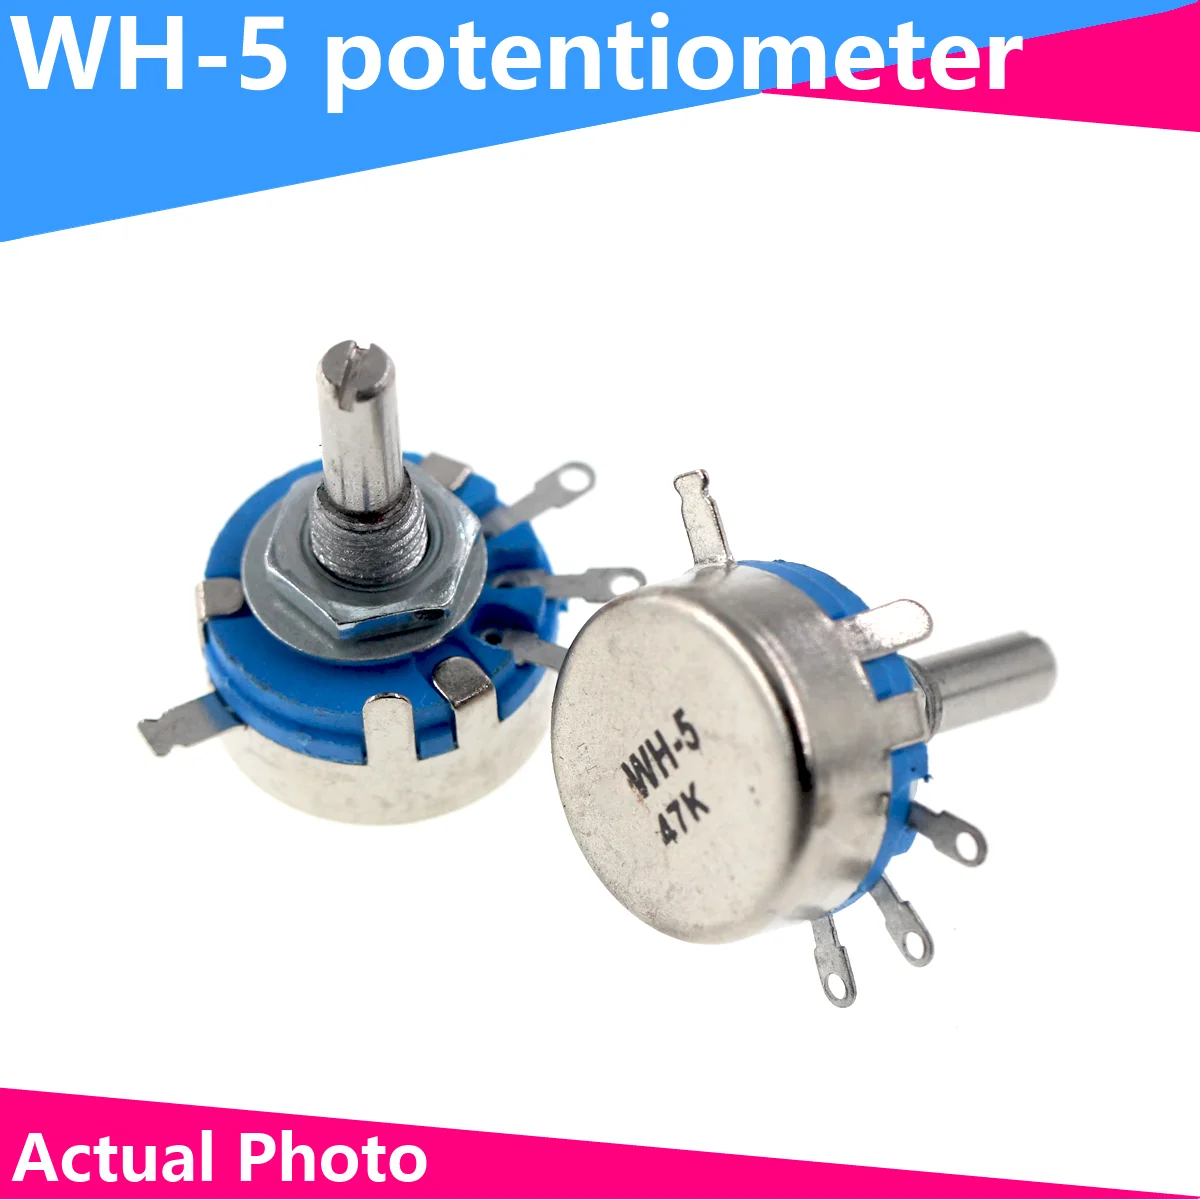 2PCS WH5-1A 470R 1K 10K 47K 4K7 100K 470K 220K 1K5 22K 1M ohm 3-Terminals Round Shaft Rotary Taper Carbon Potentiometer WH5 5pcs wth118 2w 1a potentiometer 470r 1k 2 2k 4 7k 10k 22k 47k 100k 470k 560k 1m round shaft carbon rotary taper potentiometer